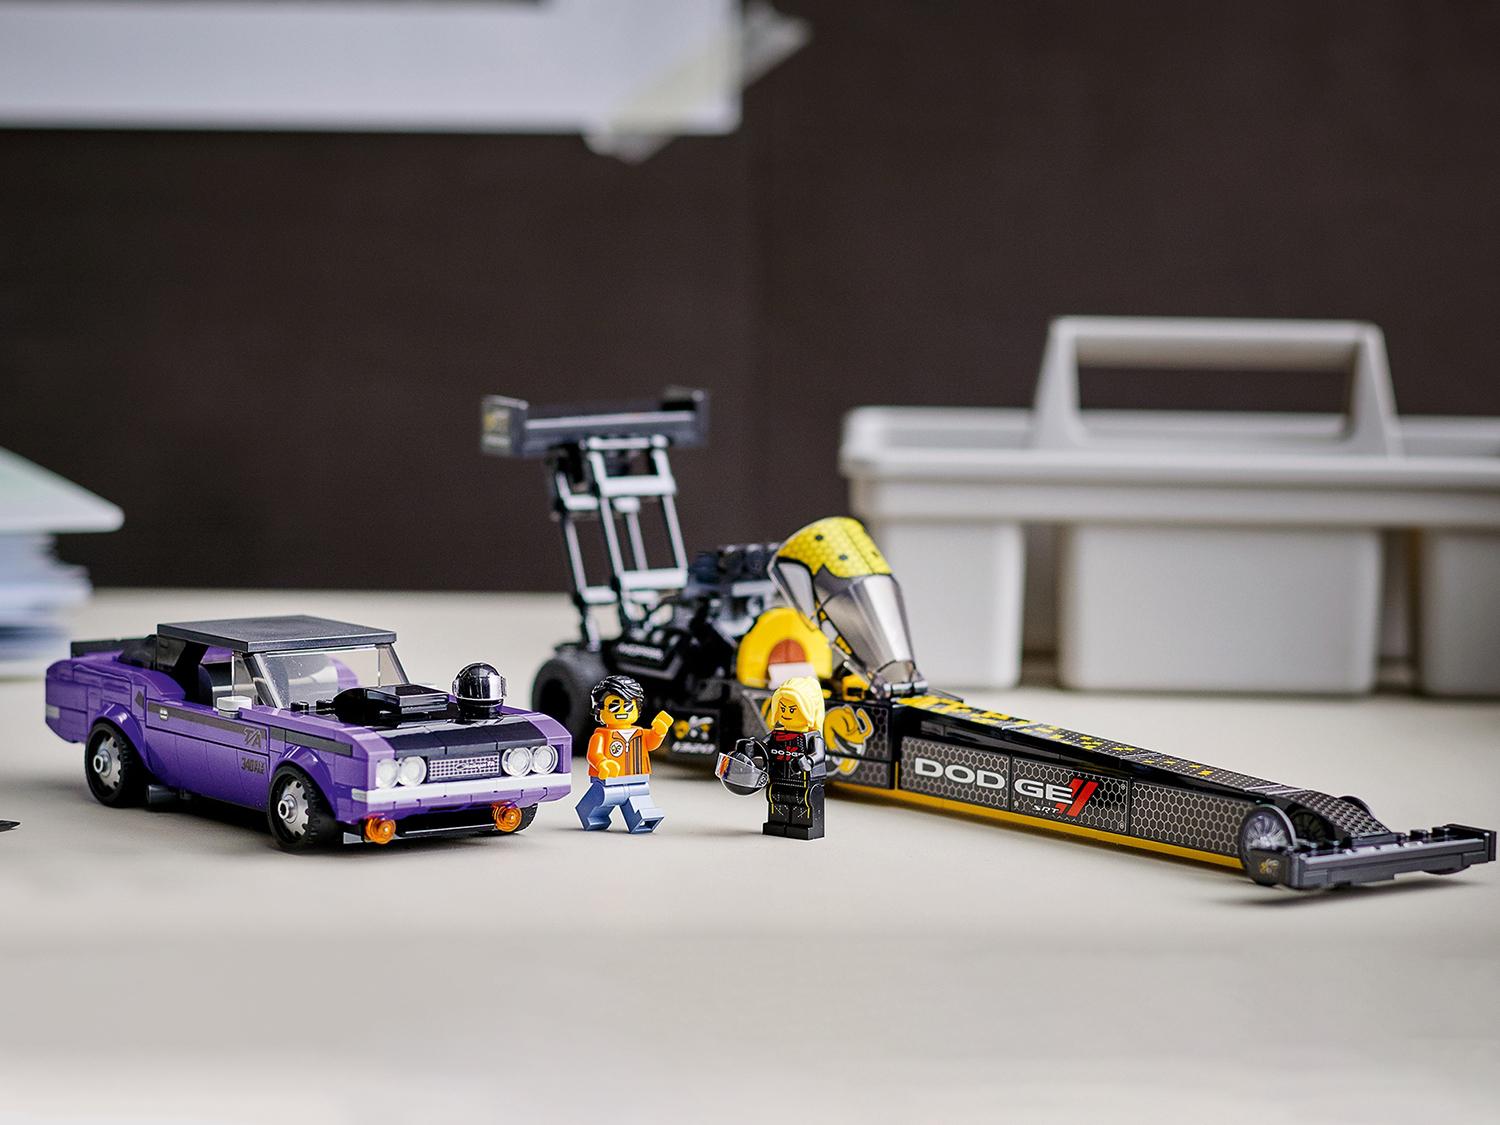 The LEGO Speed Champions series is adding two new Dodge models to its lineup.